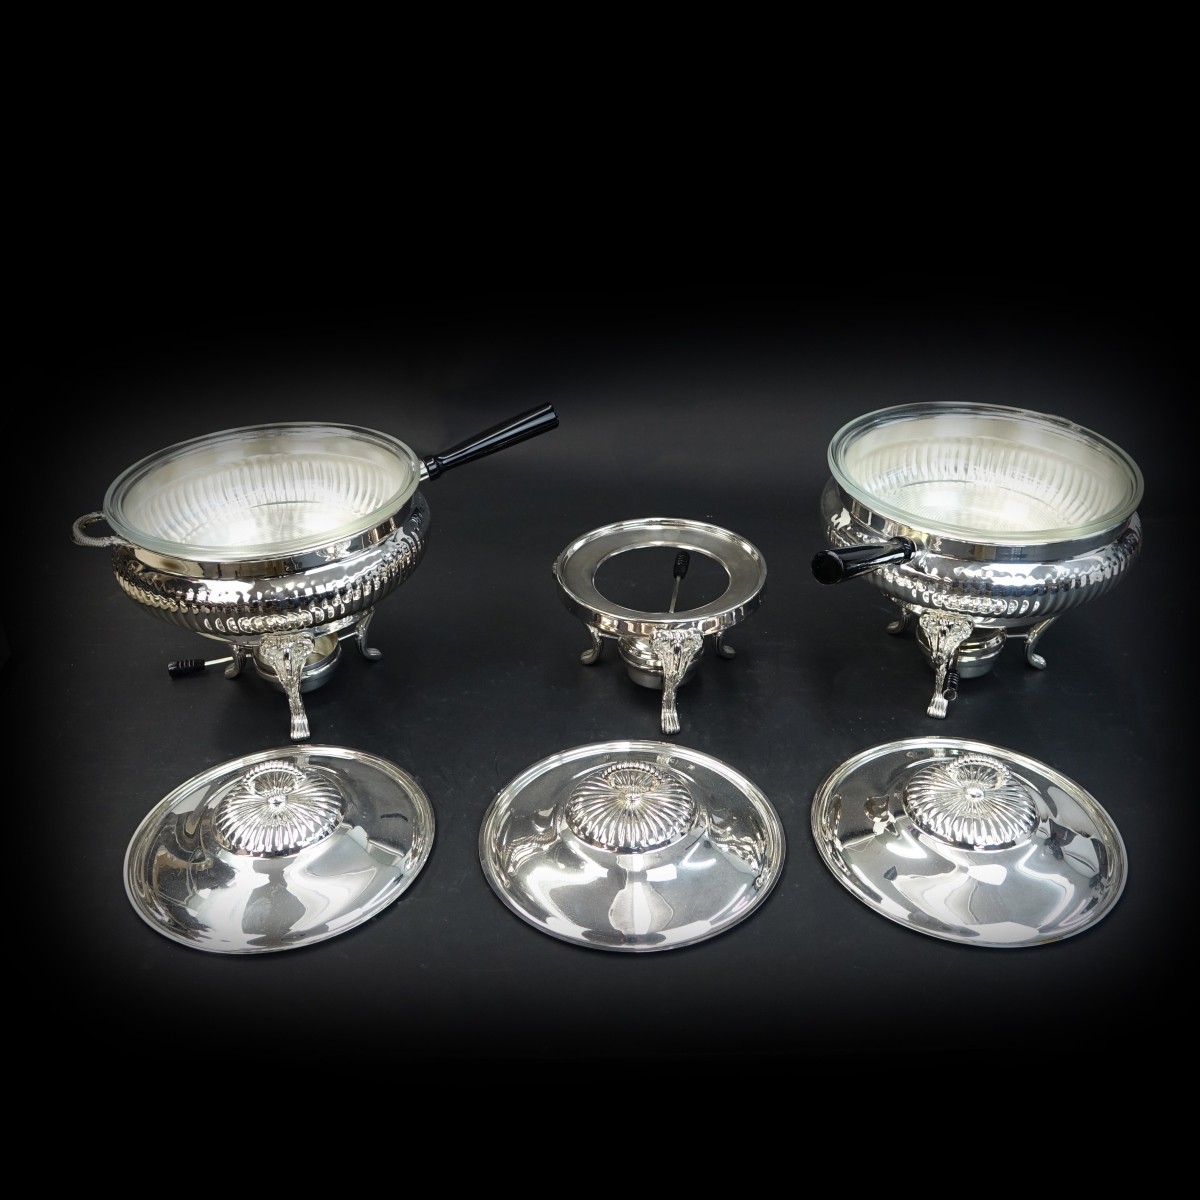 3 Reed & Barton Chafing Dishes